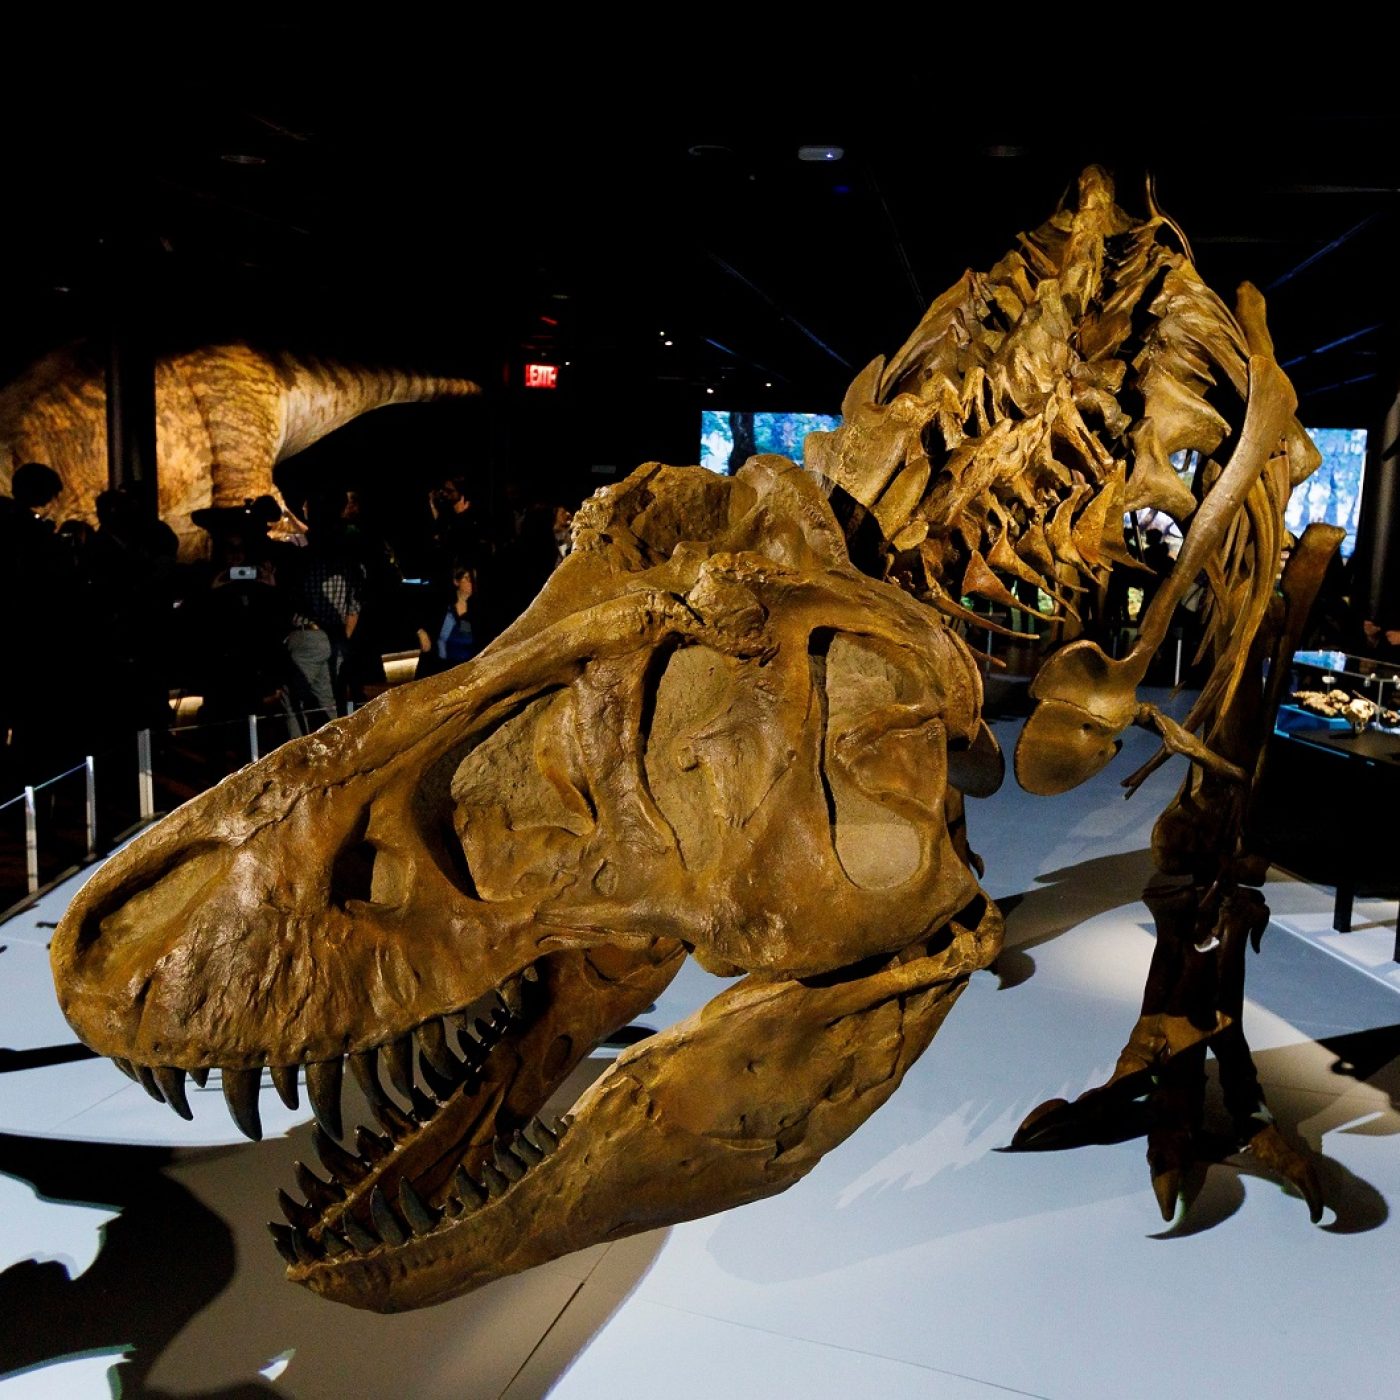 World's biggest T. rex discovered in Canada